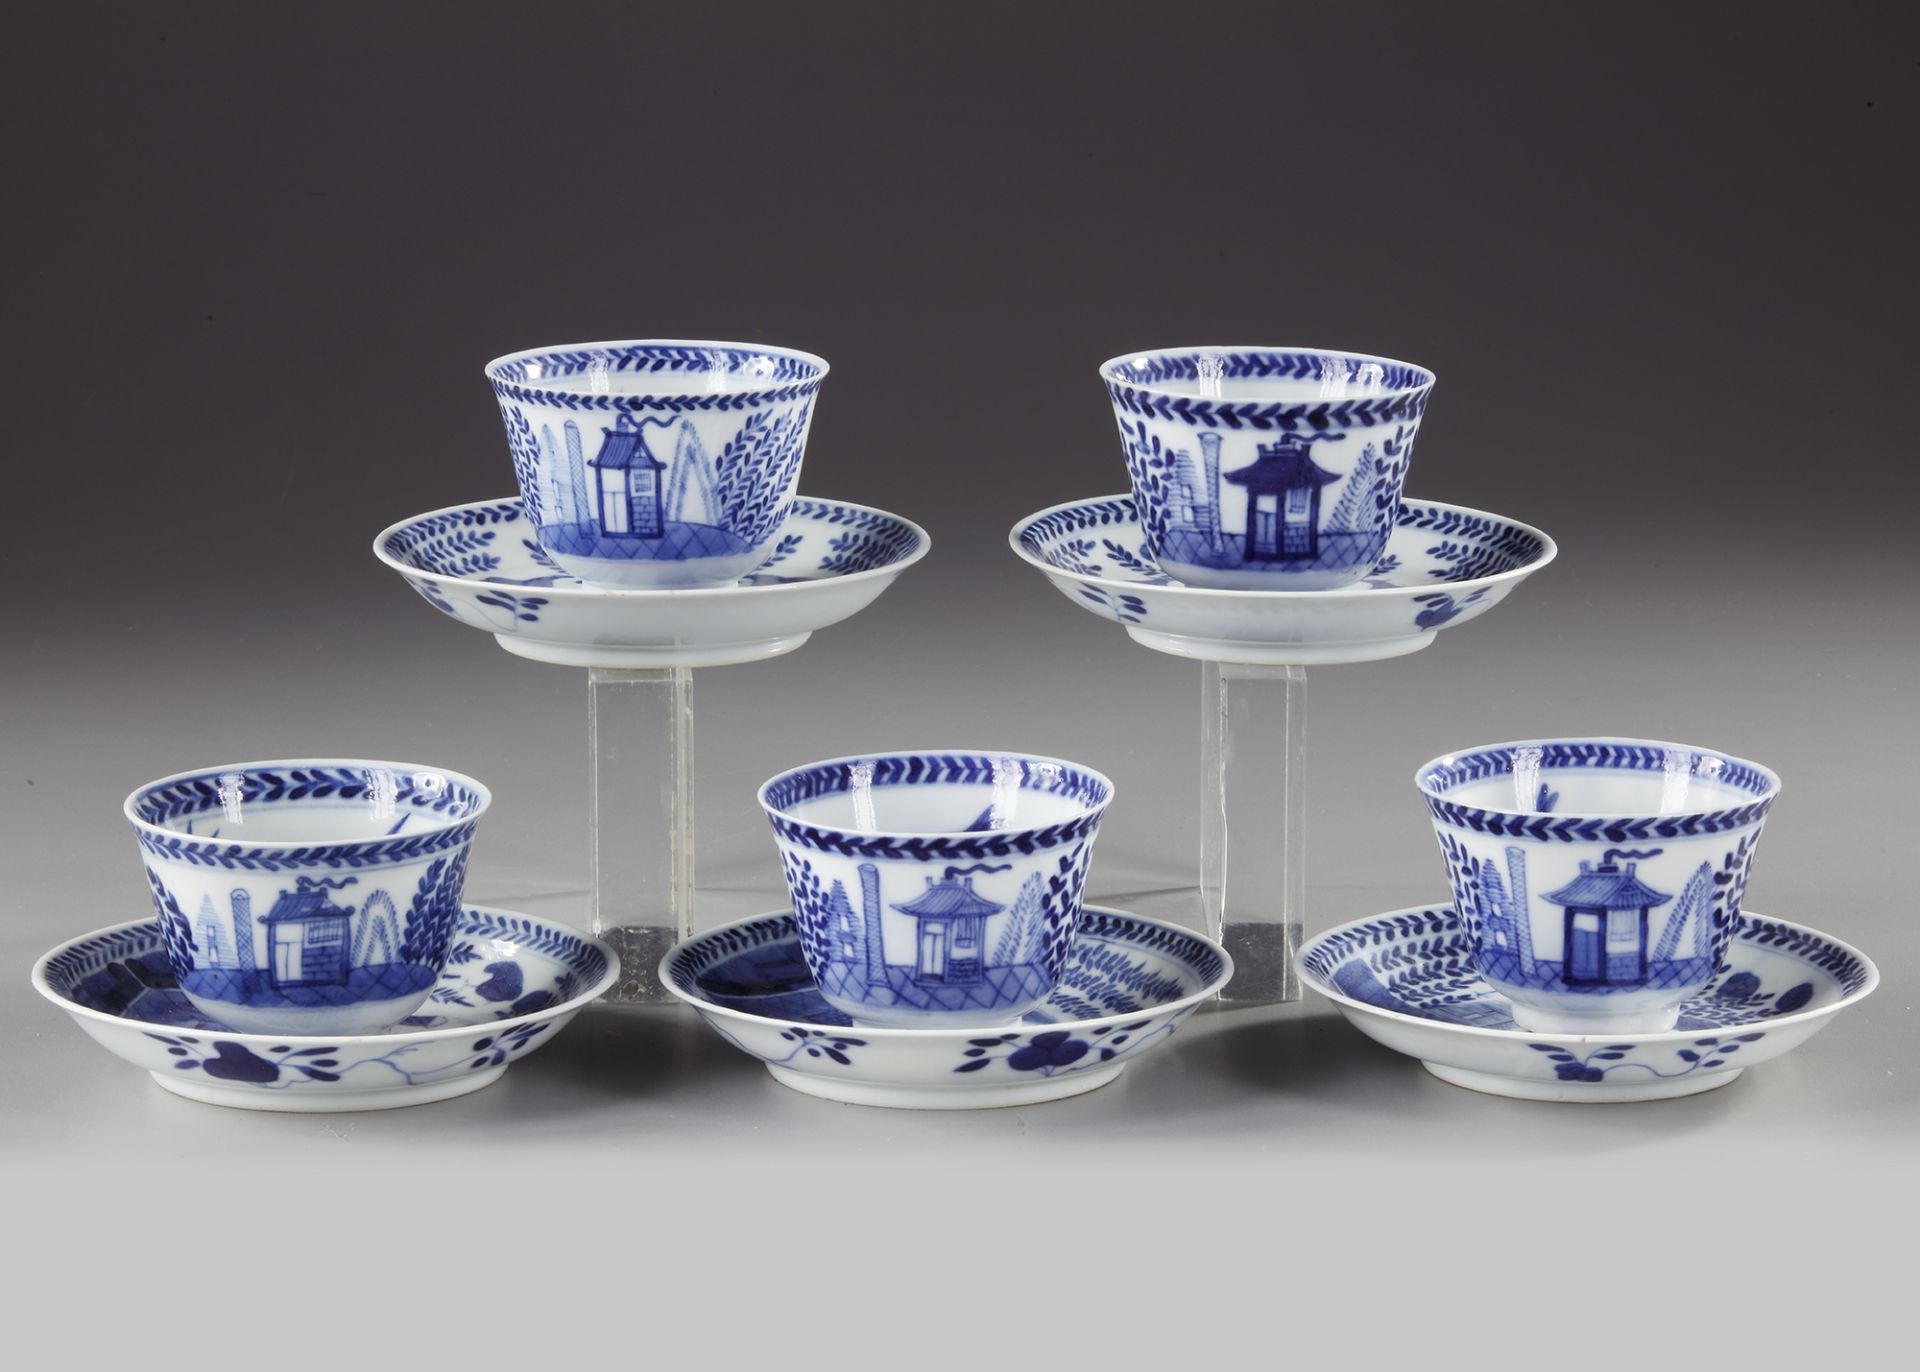 FIVE CHINESE BLUE AND WHITE 'CUCKOO IN THE HOUSE' CUPS AND SAUCERS, 18TH CENTURY